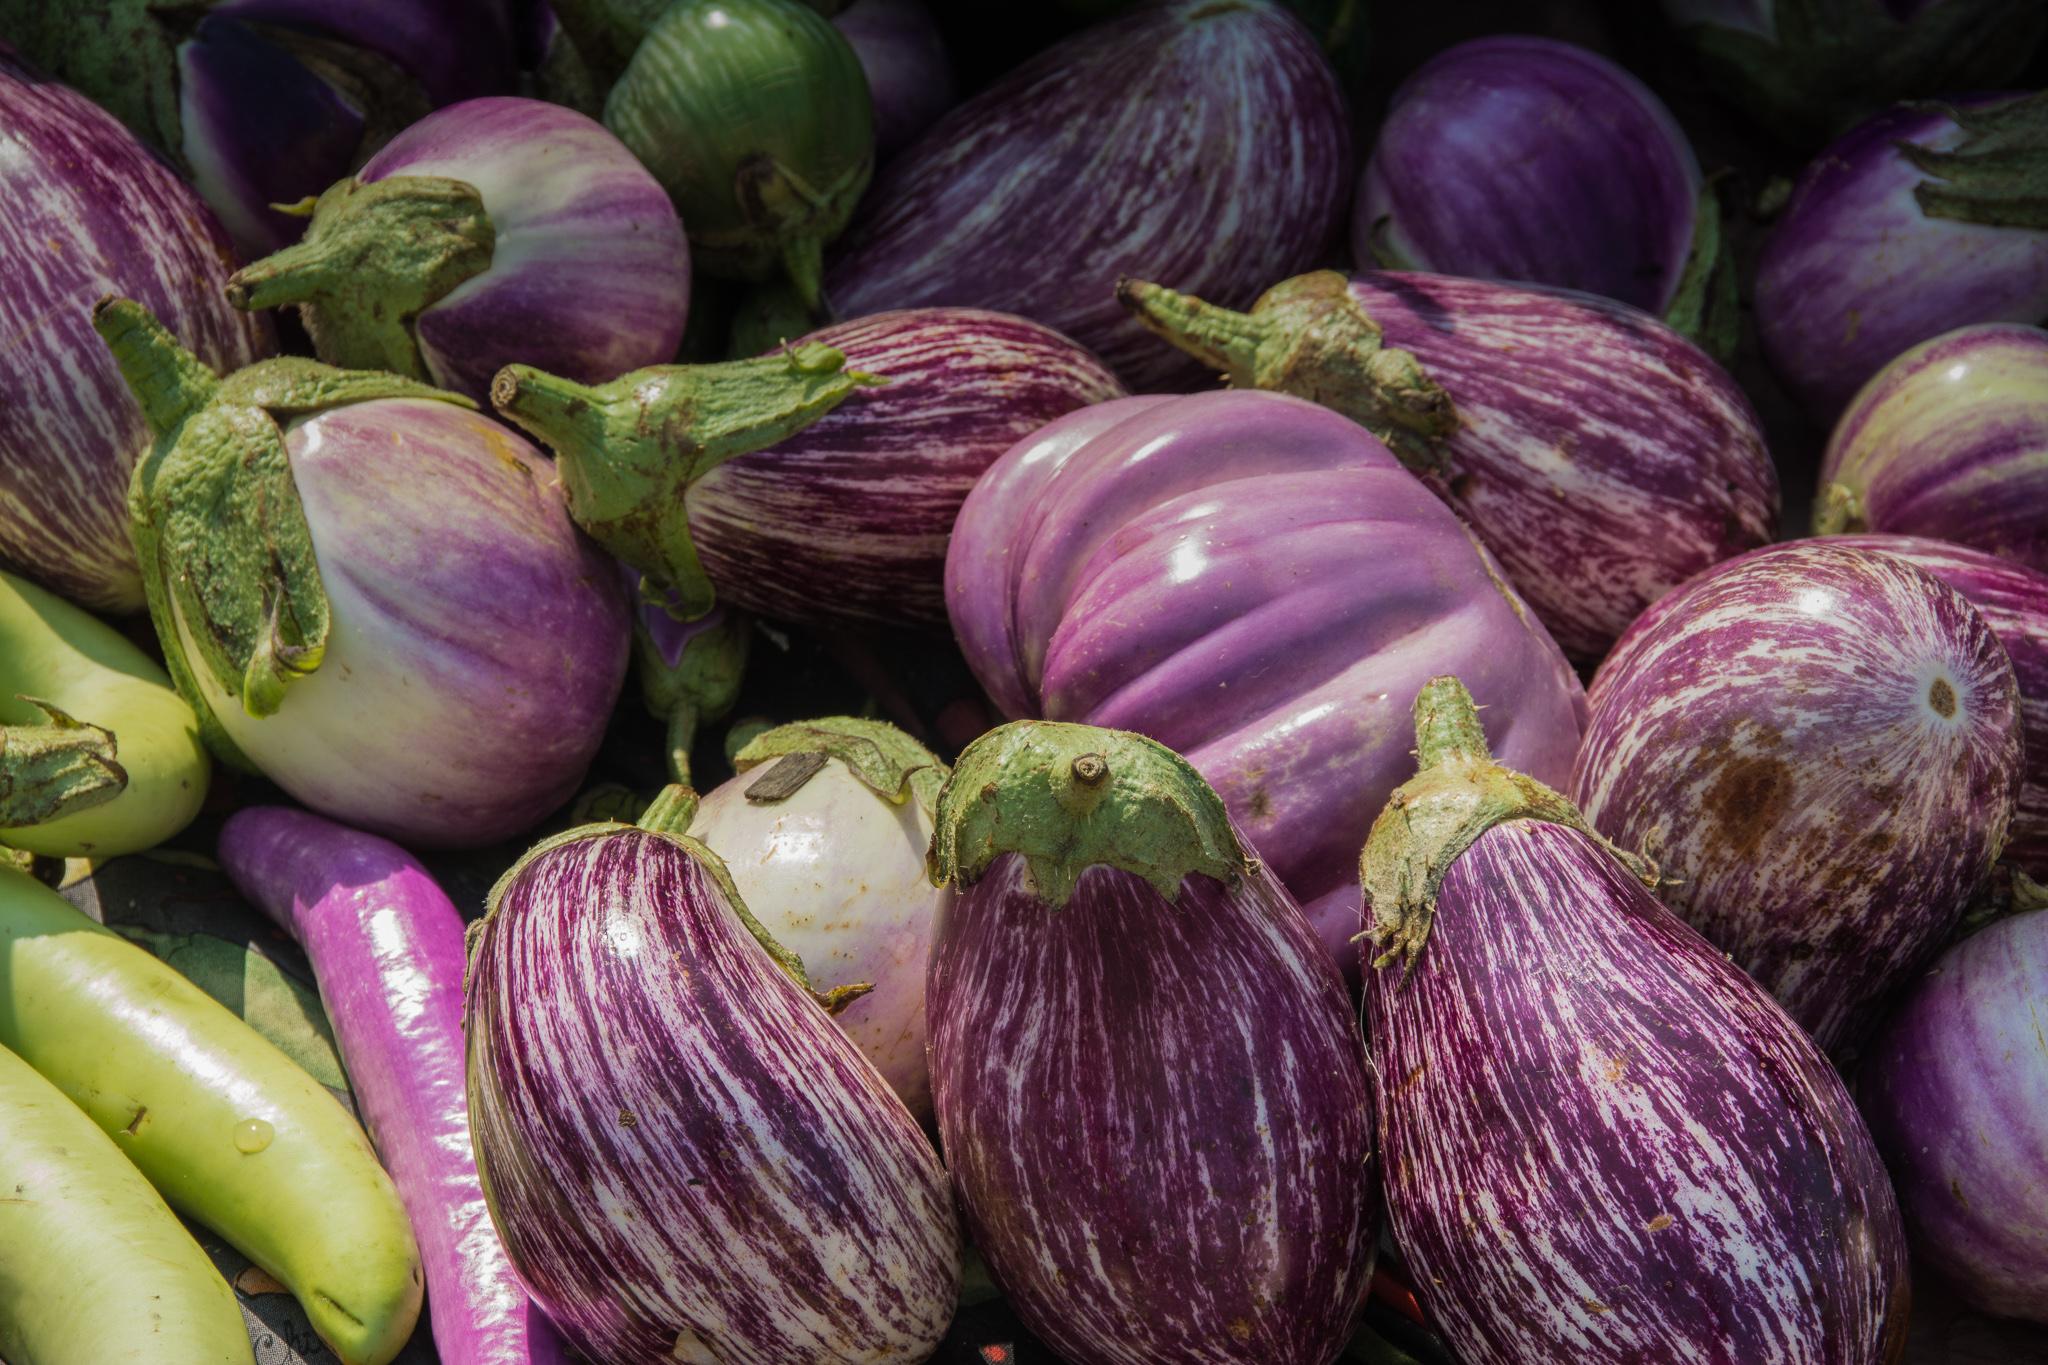 Eggplants of different varieties sit in a pile.